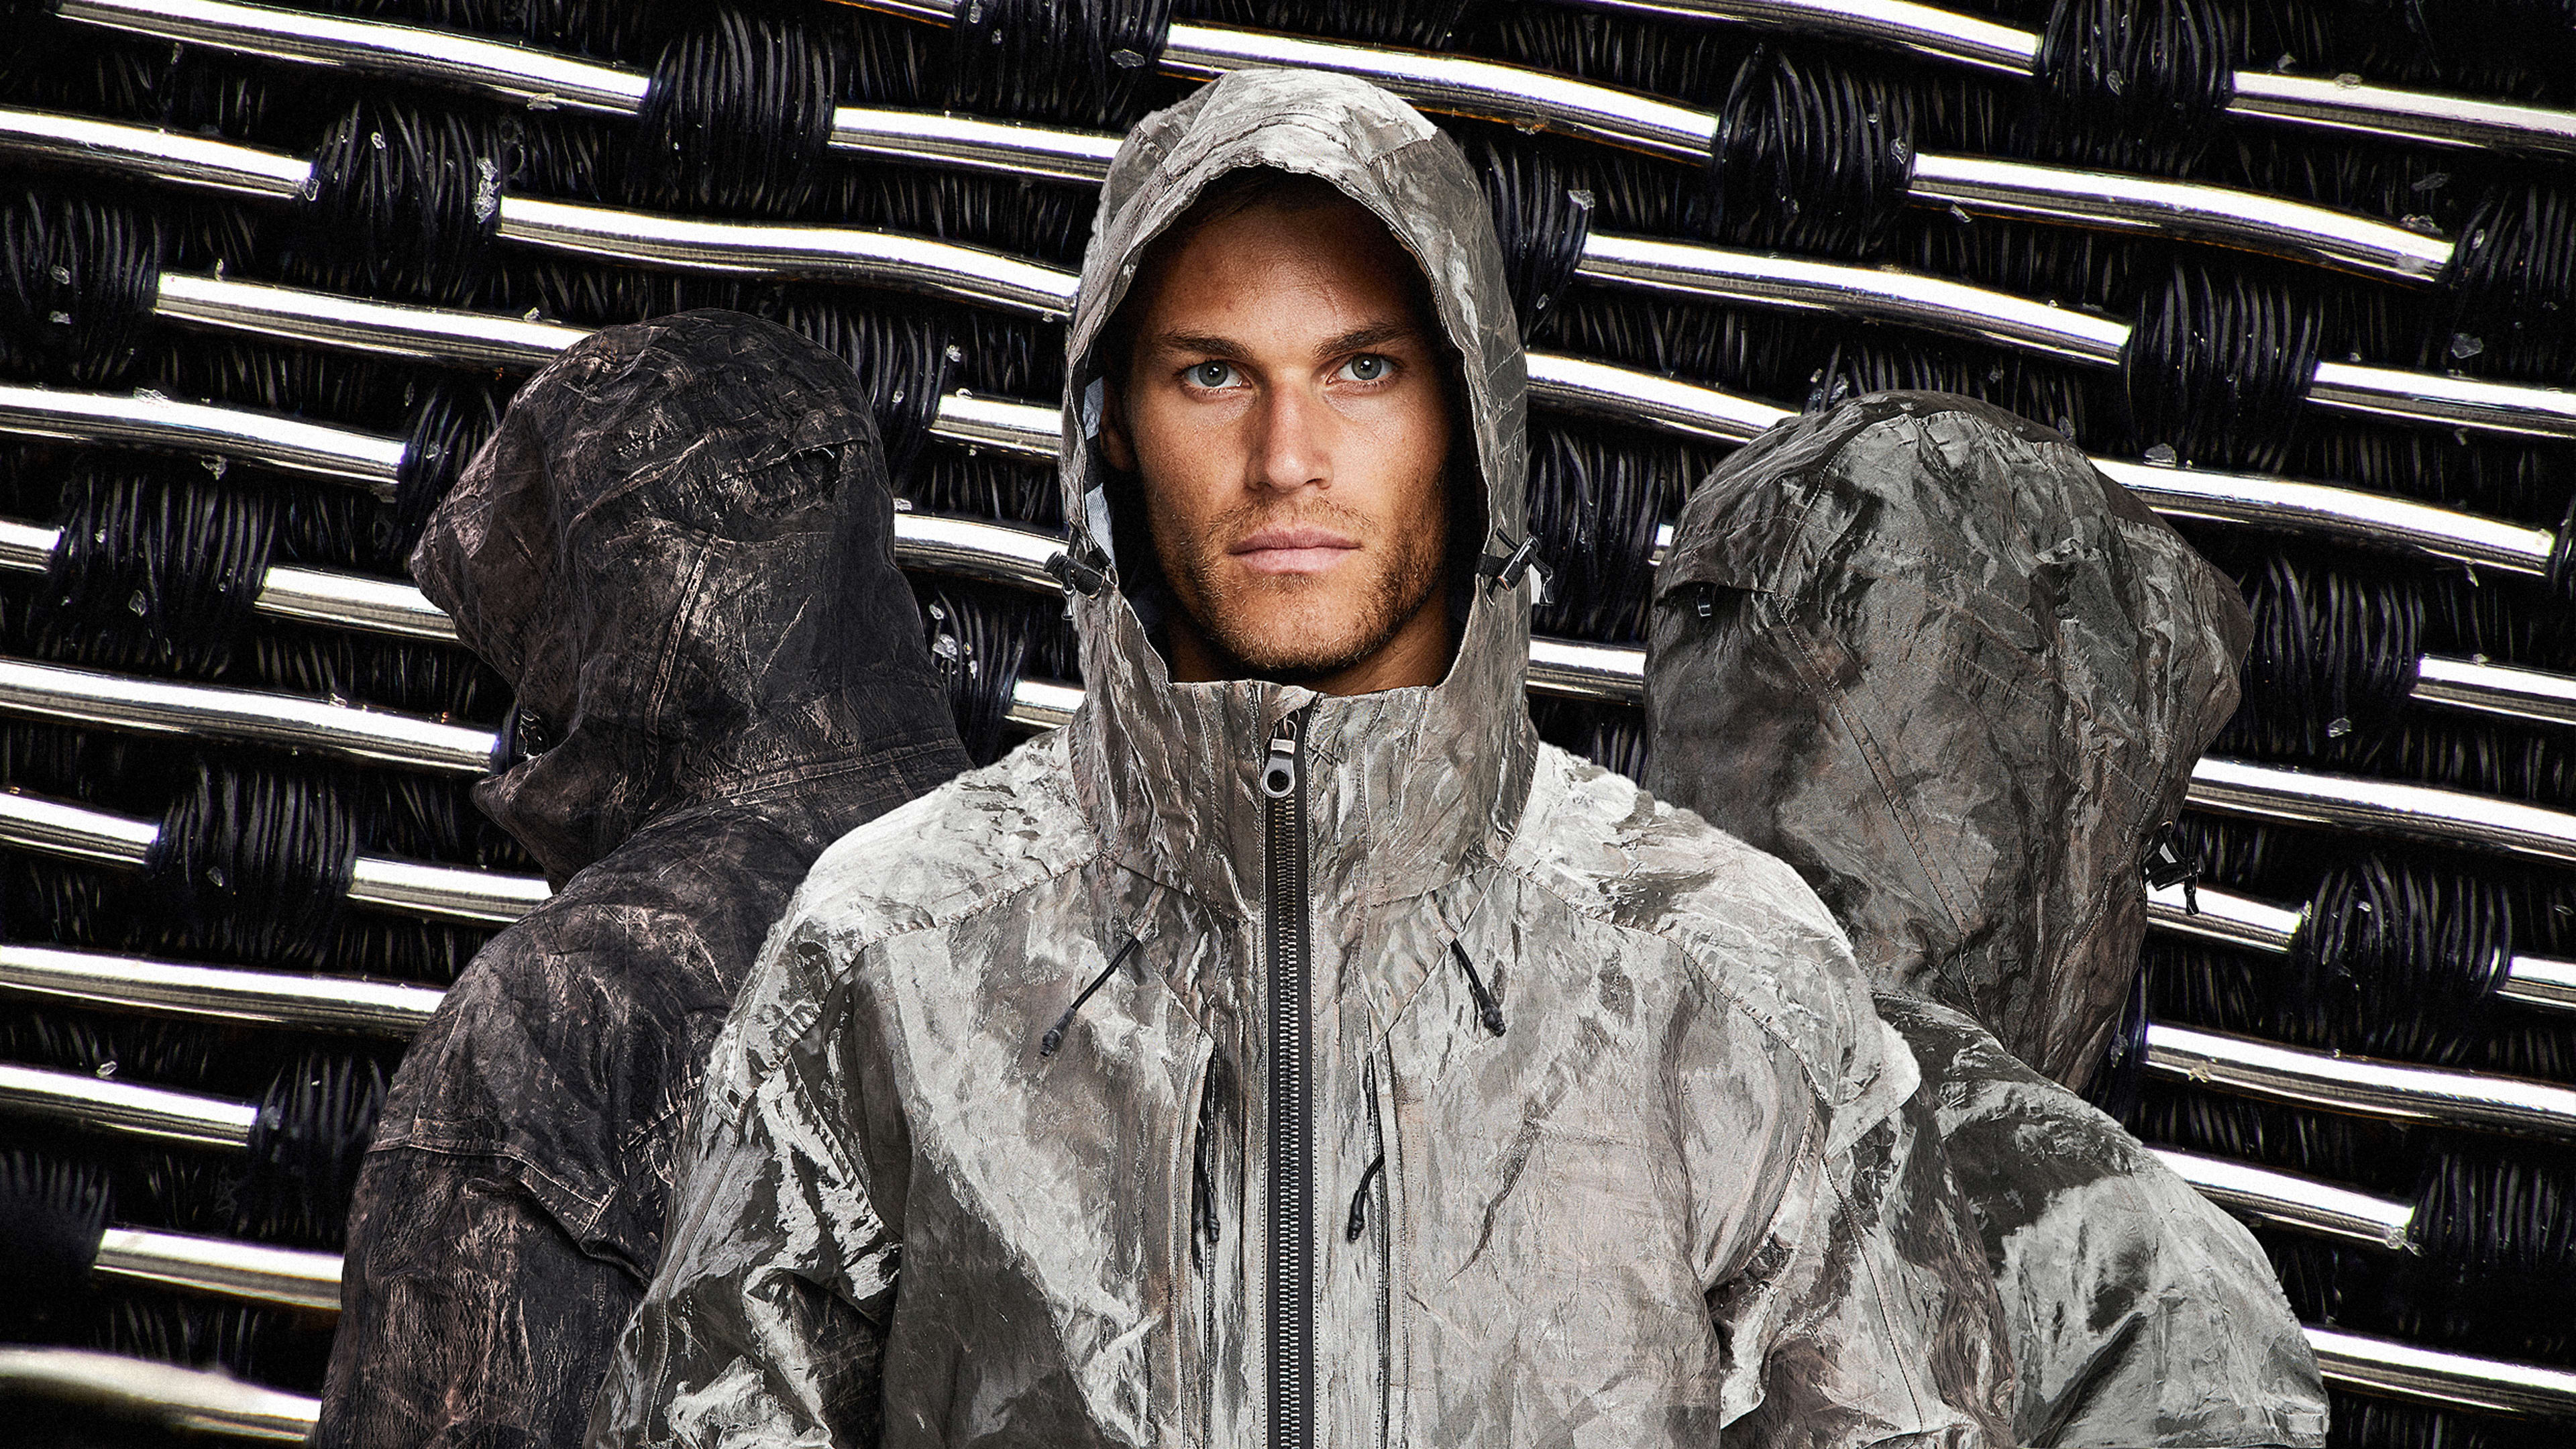 This $1K copper jacket is designed to kill viruses and bacteria